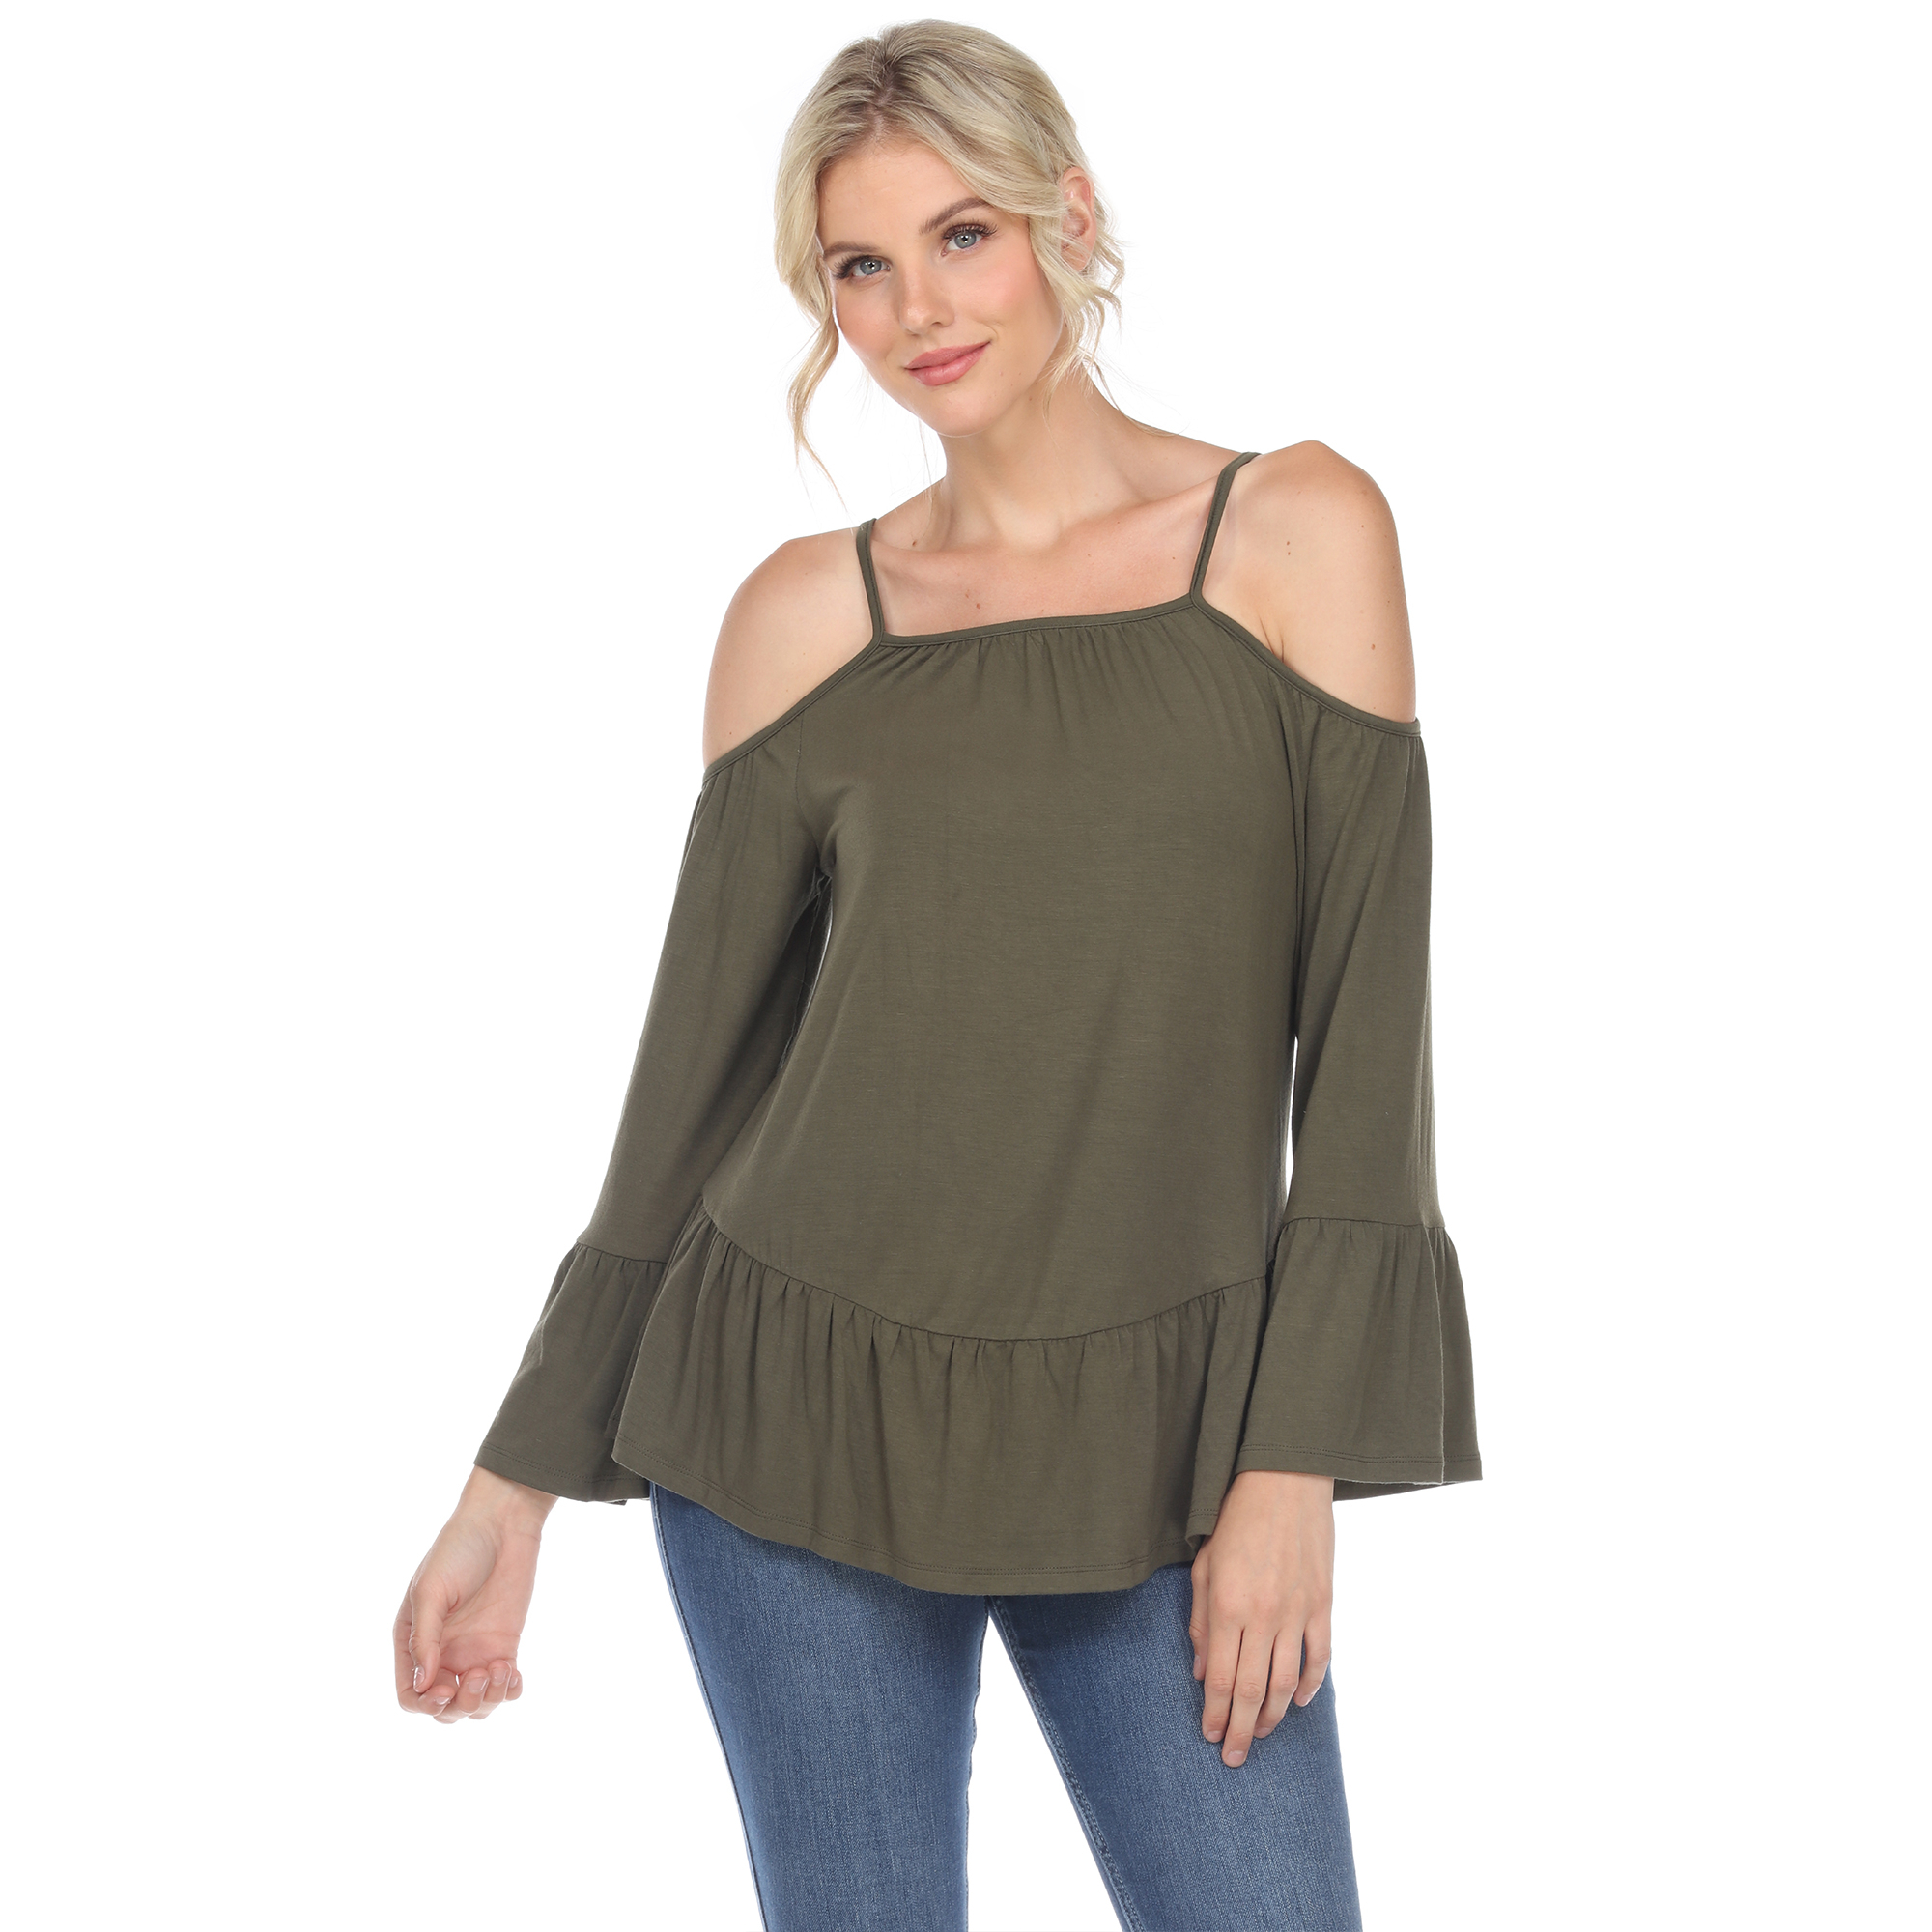 White Mark Women's Cold Shoulder Ruffle Sleeve Top - Olive, 1X